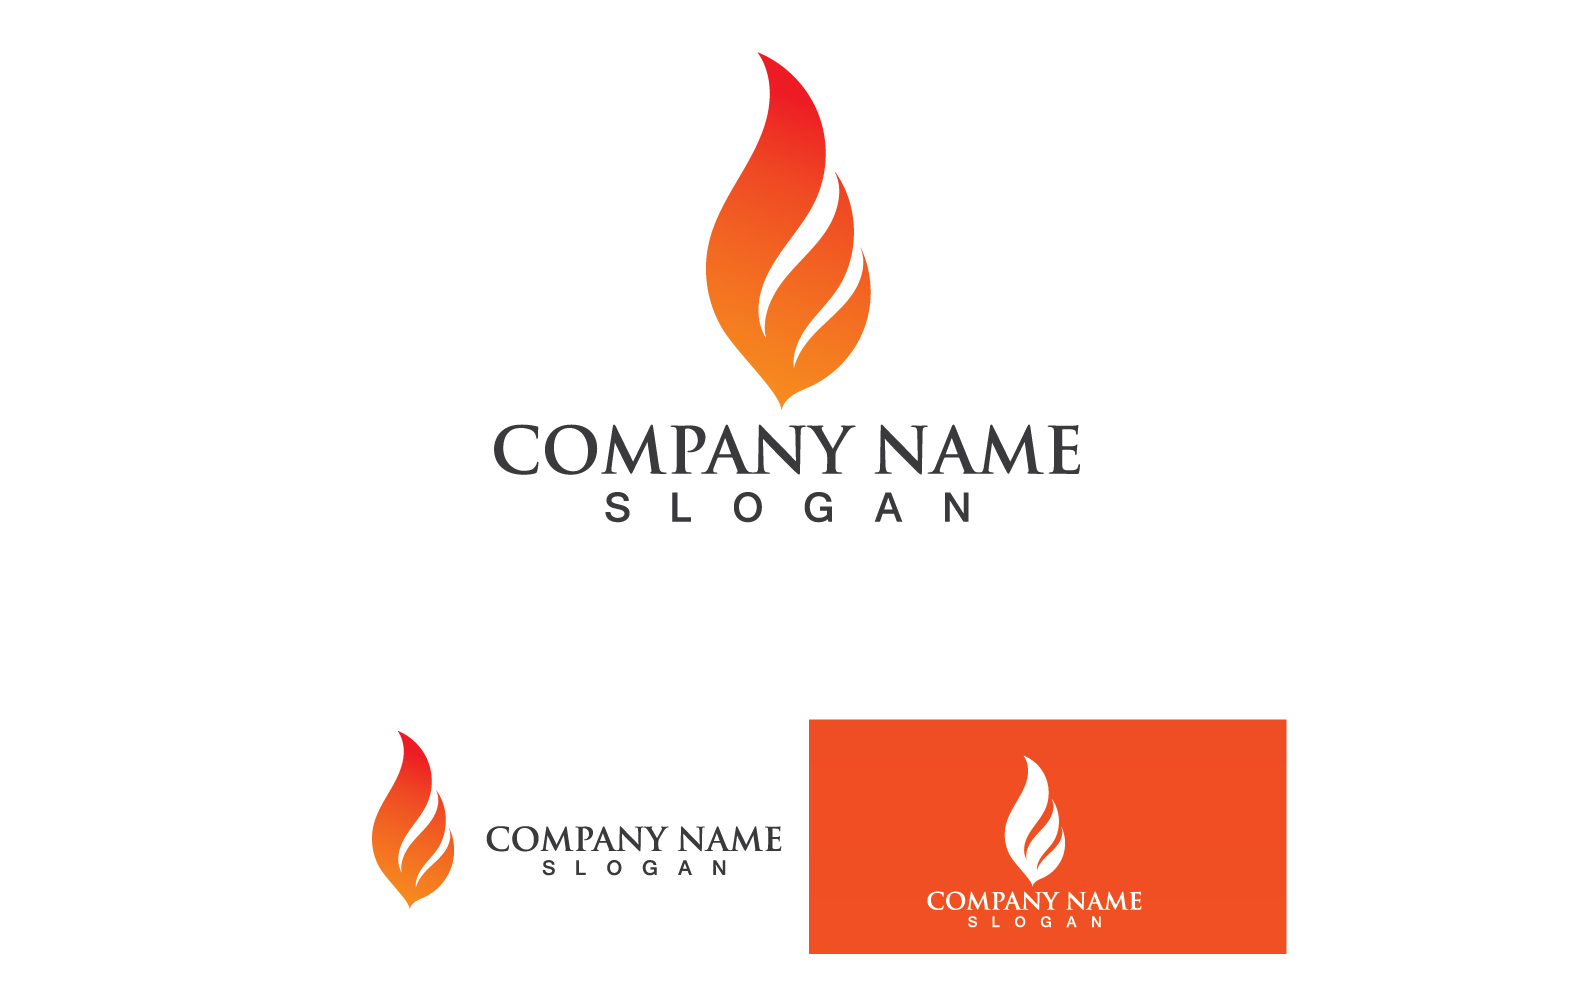 Wing Bird Business Logo Your Company Name V16